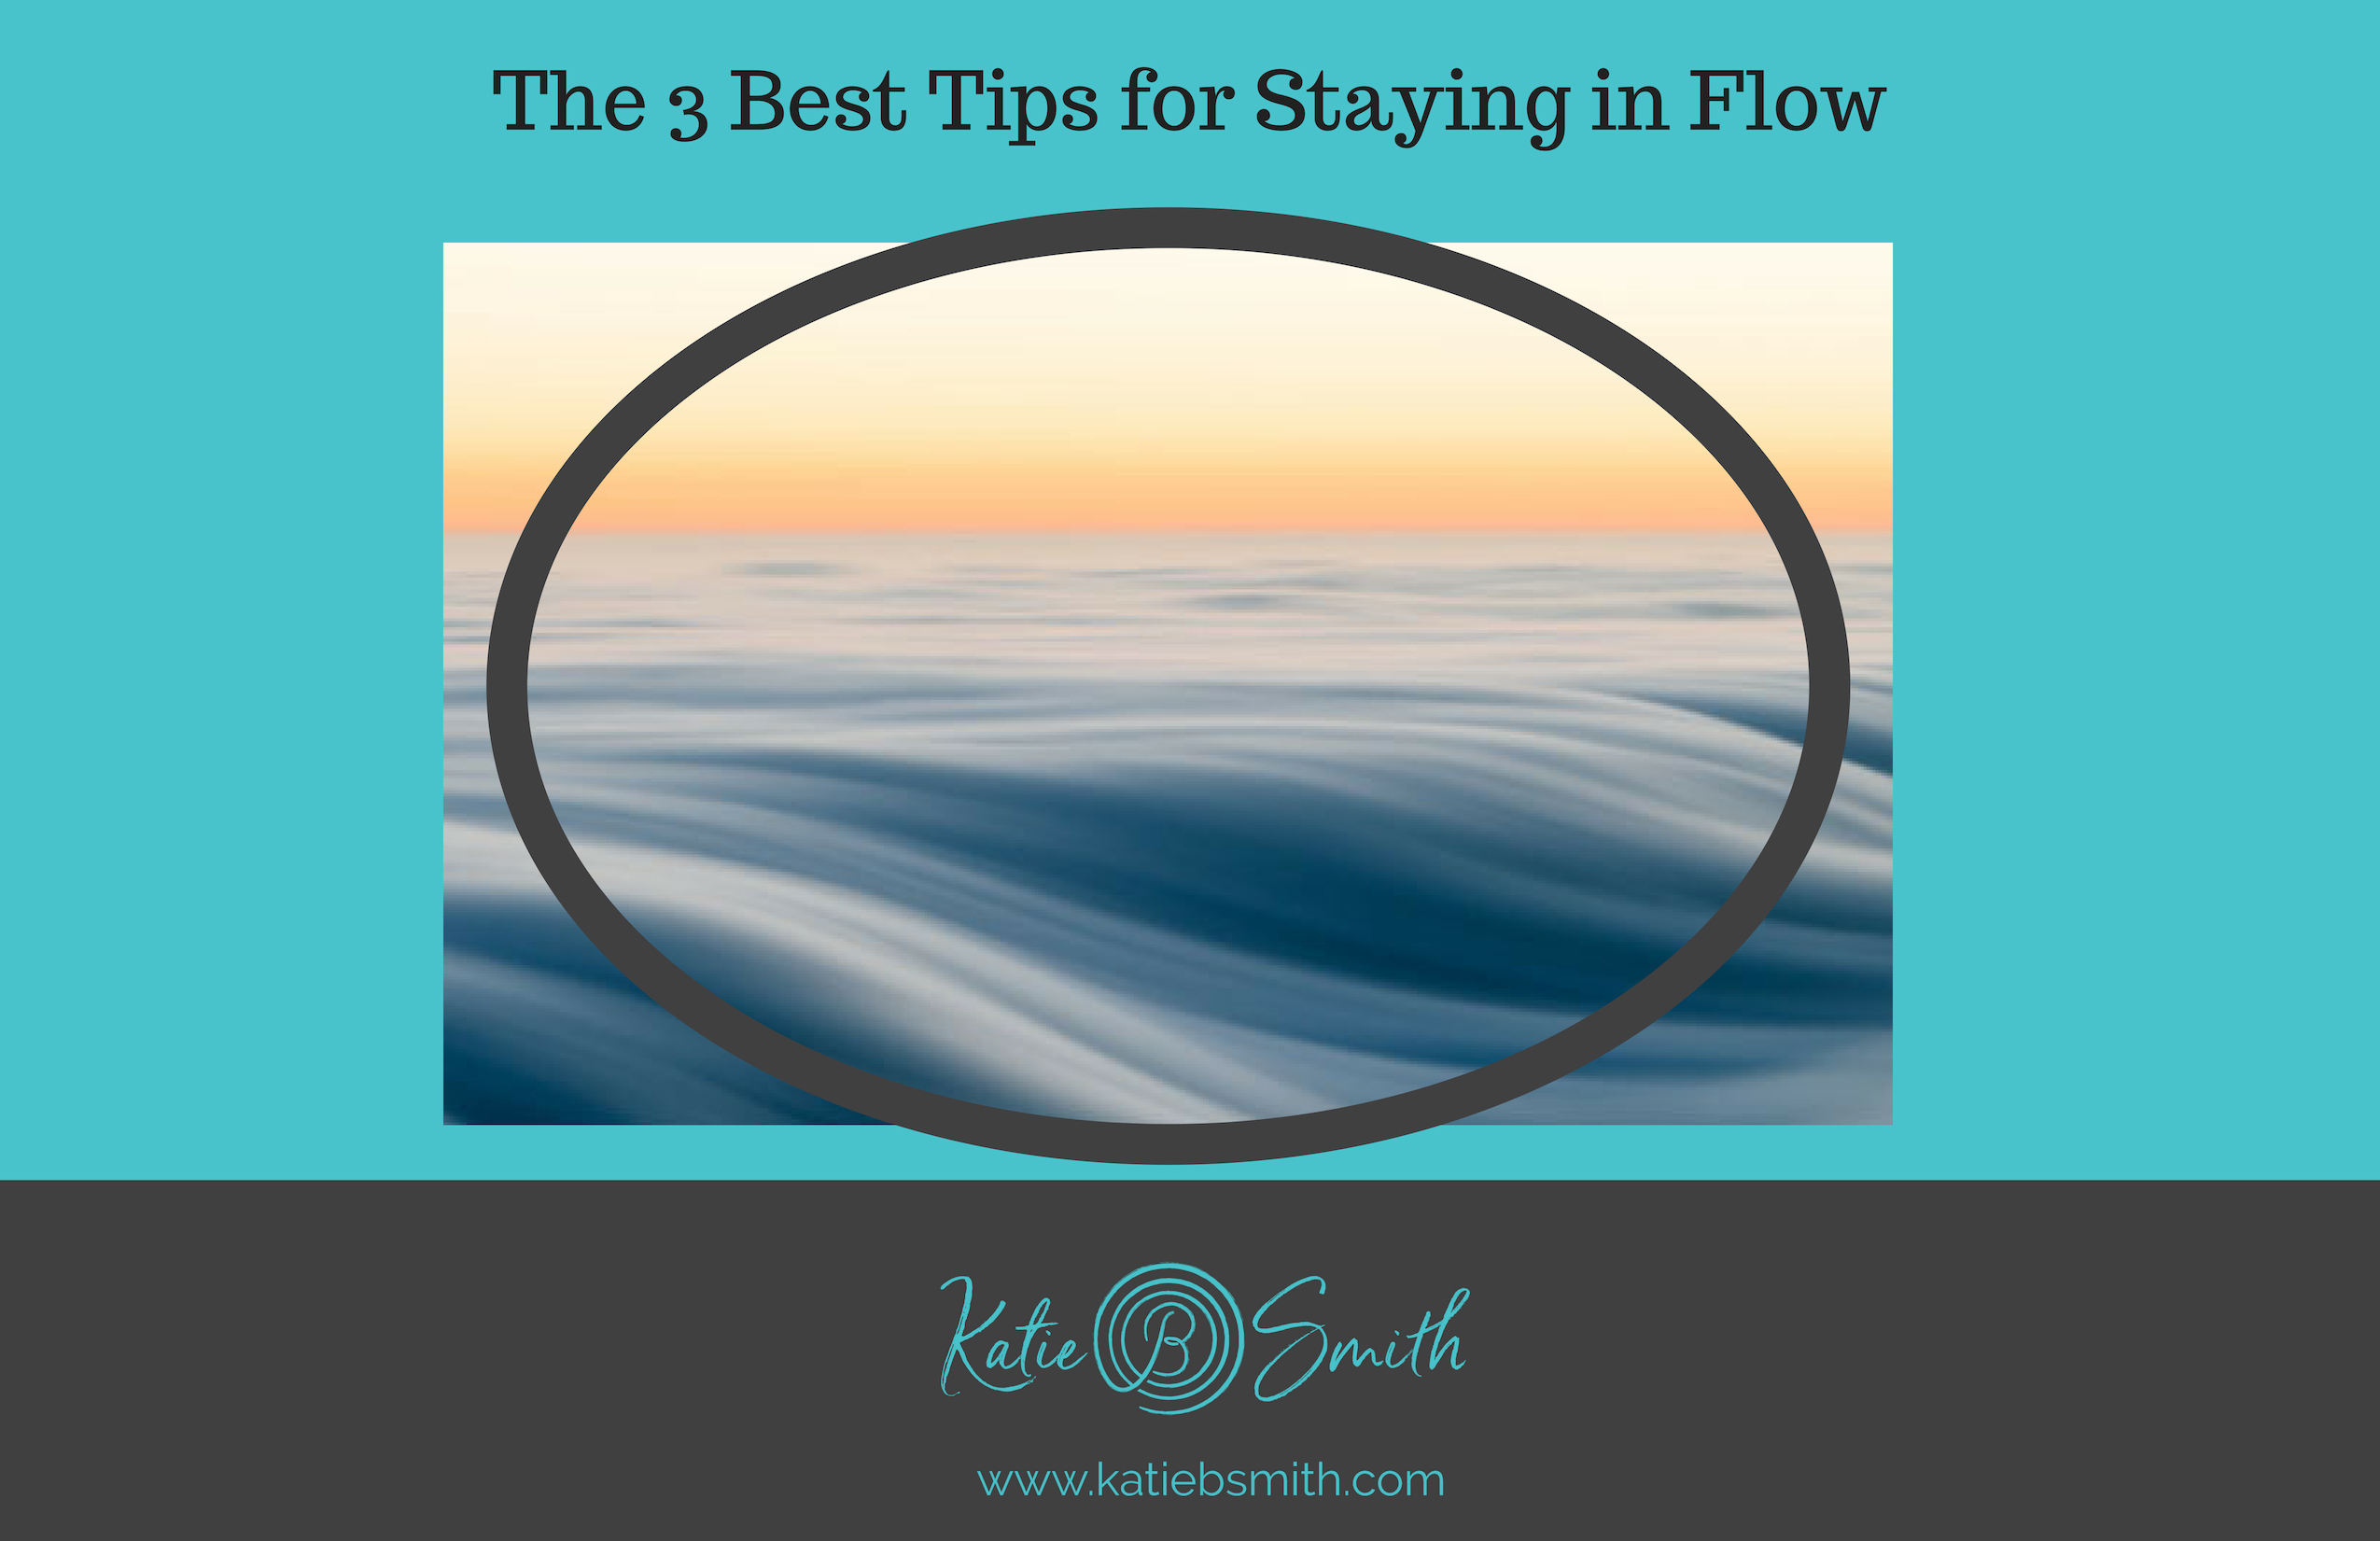 The 3 Best Tips for Staying in Flow